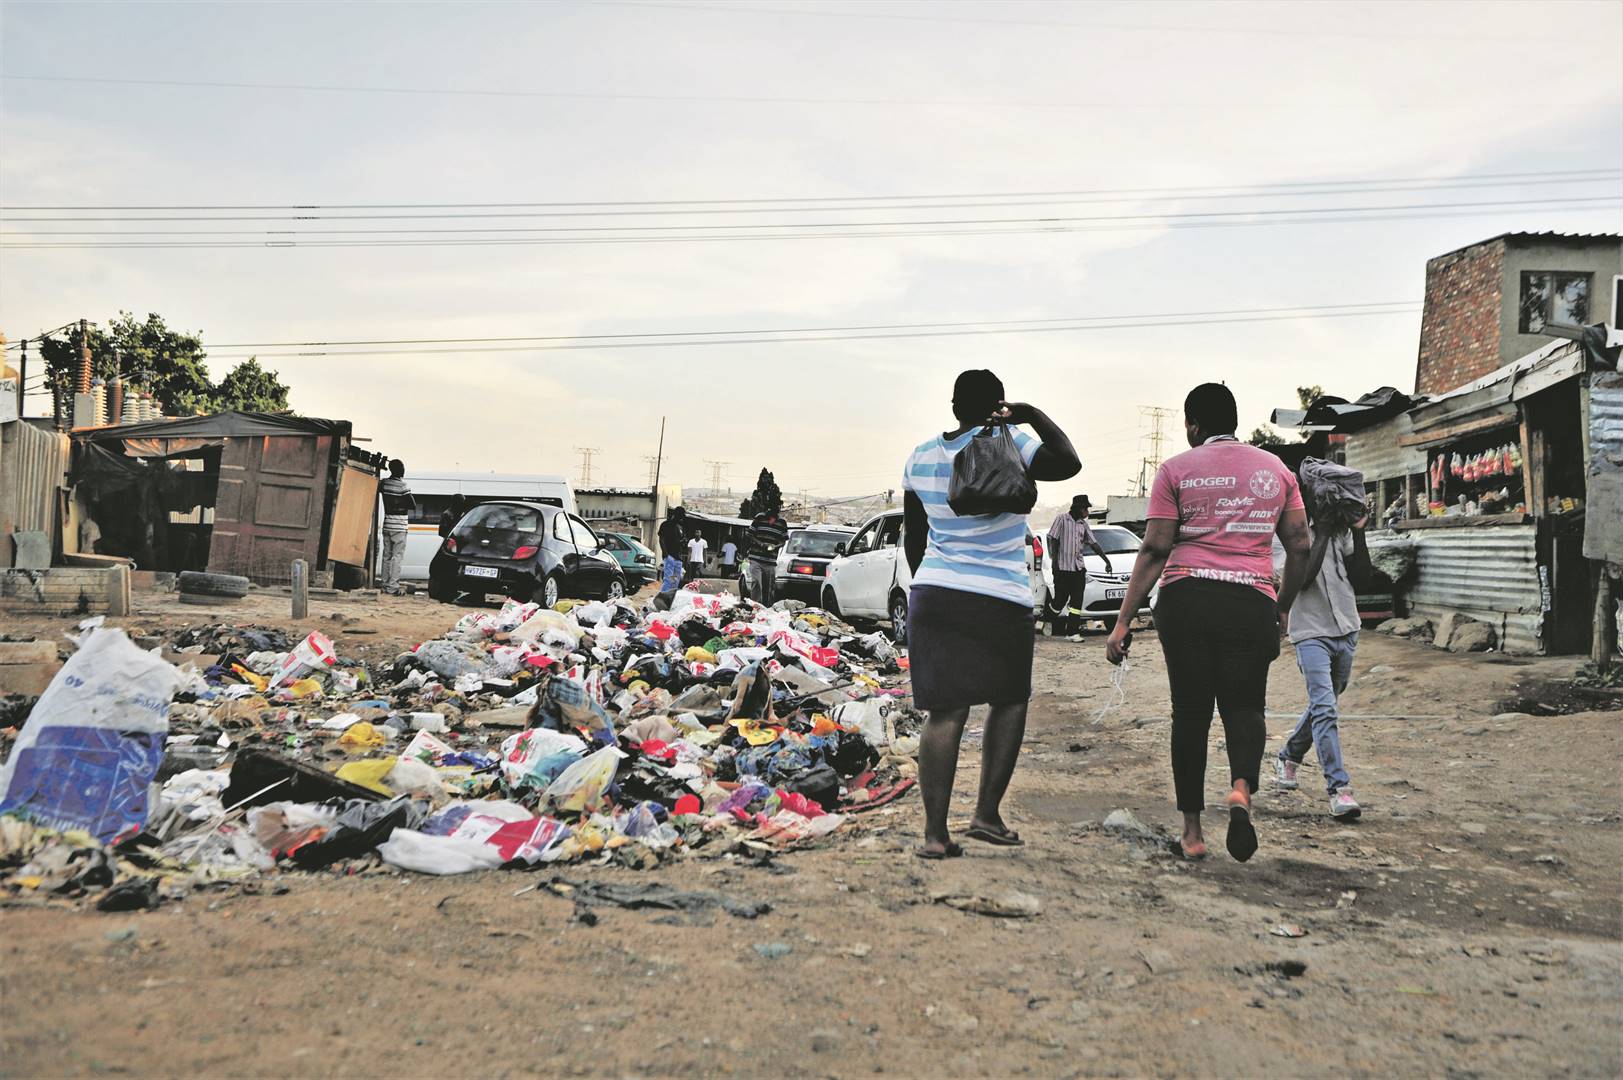 Alexandra township struggles with inadequate service delivery. Between the potholes, sewage, waste and shortage of water residents are frustrated and are tired of empty promises. Photo: Rosetta Msimango